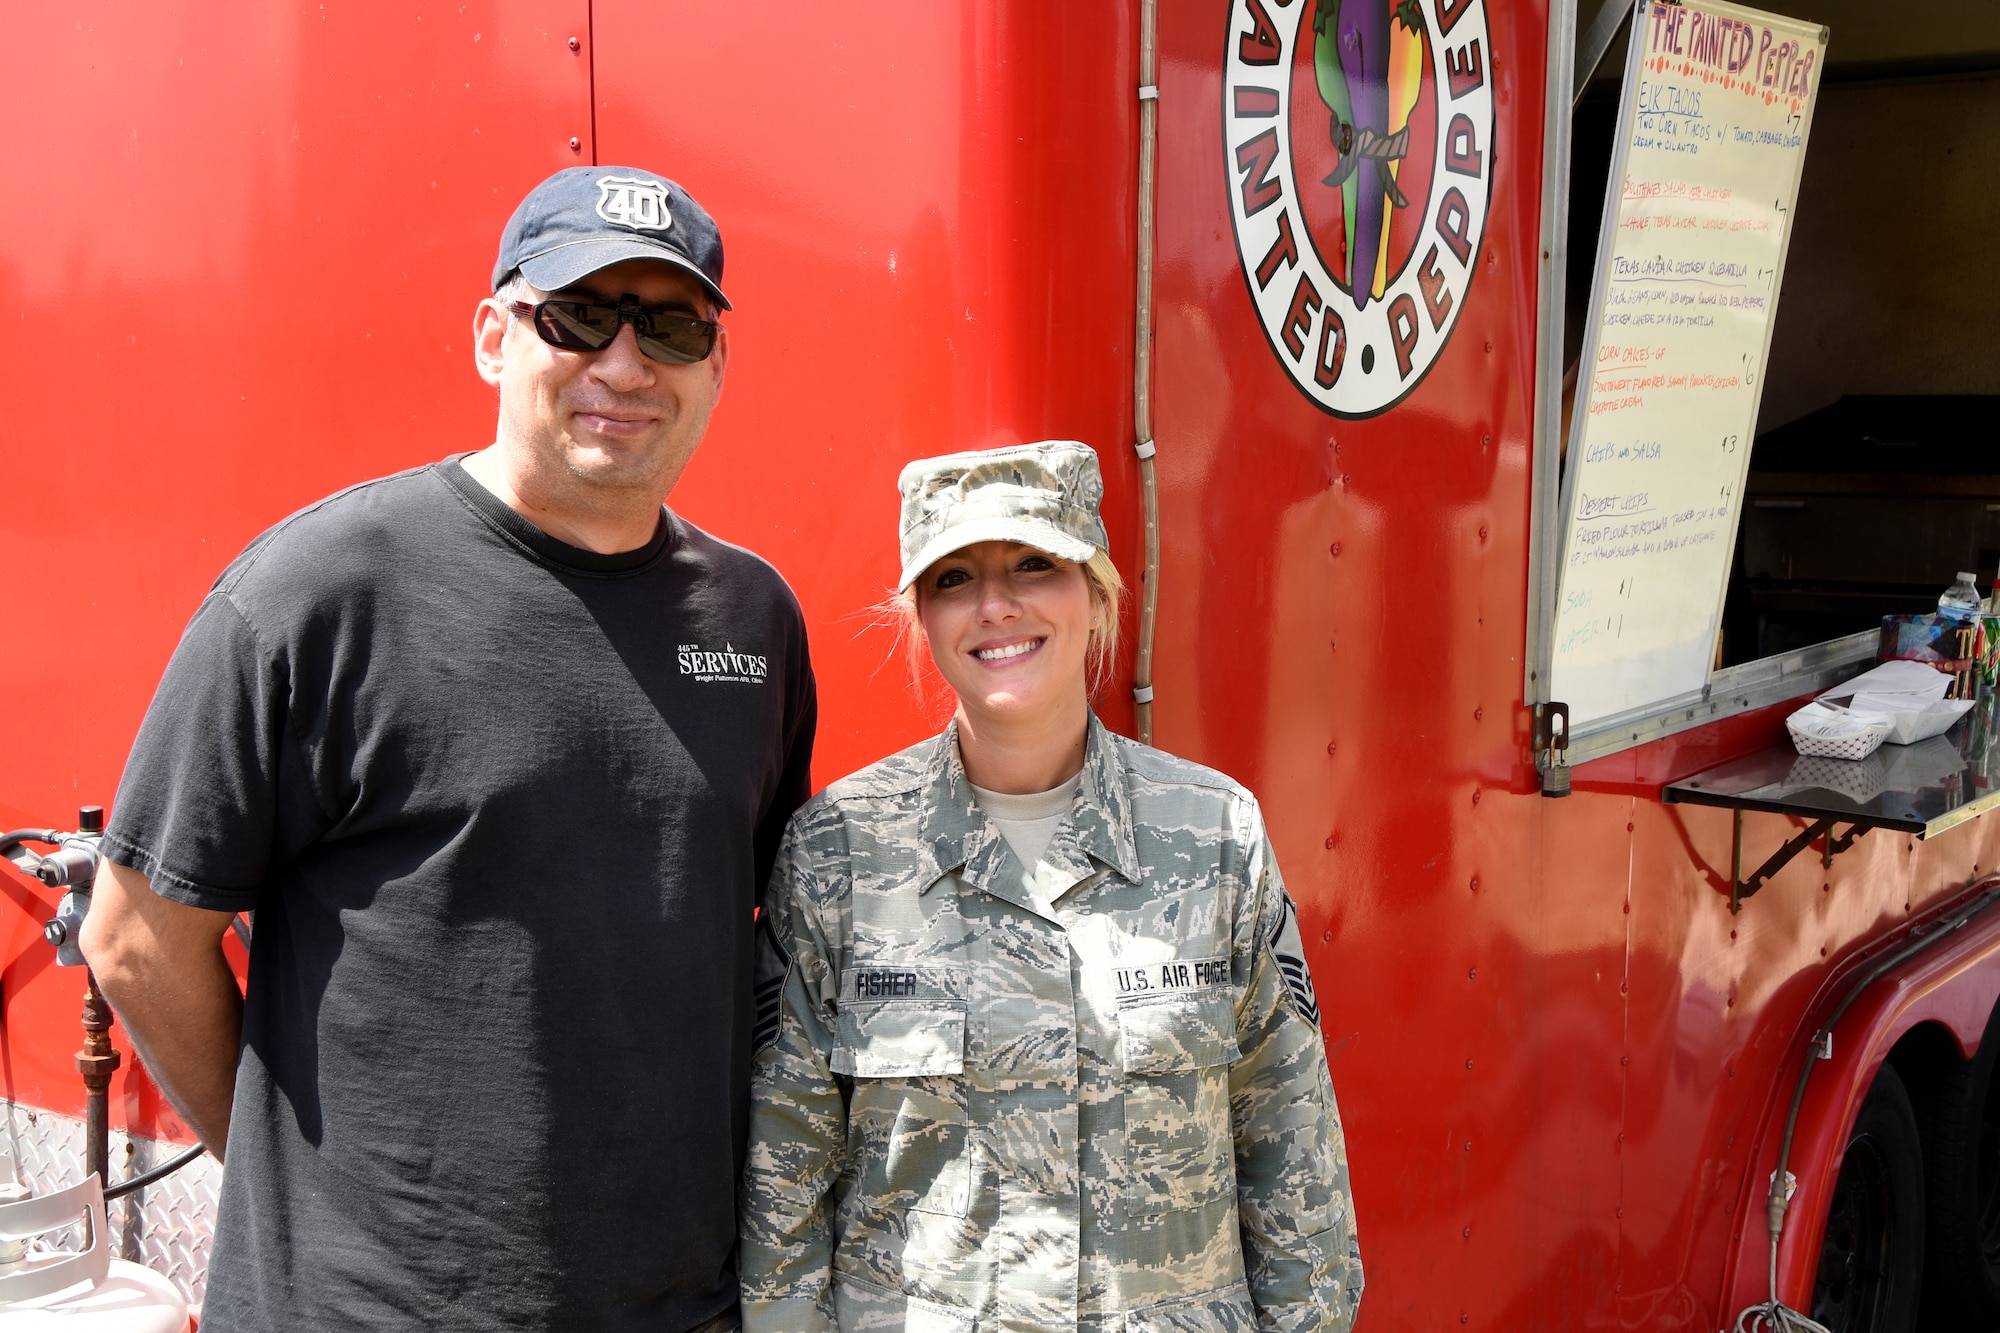 Tech. Sgt. Jason Hague, 178th Services Flight and Master Sgt. Andrea Fisher, wing staff stand in front of the Painted Pepper food truck July 27 at the Springfield Ohio Air National Guard base. 
Their cooperative effort will bring a variety of food trucks to the base once a week throughout the rest of the summer.